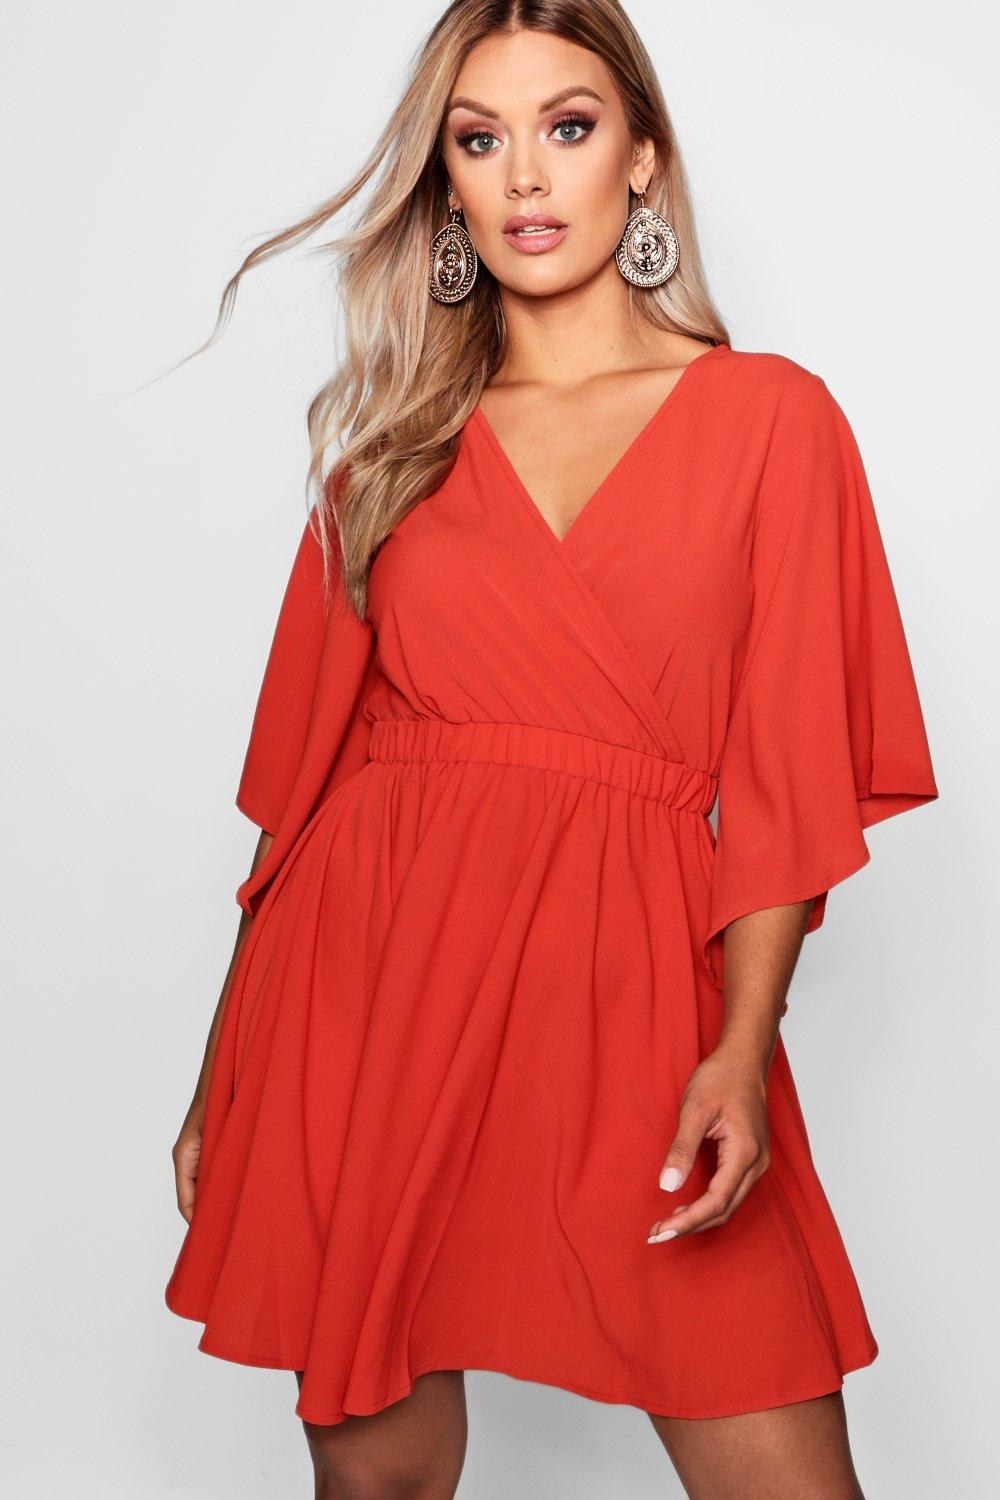 34 Cute Dresses I Think You Need To See Right Now